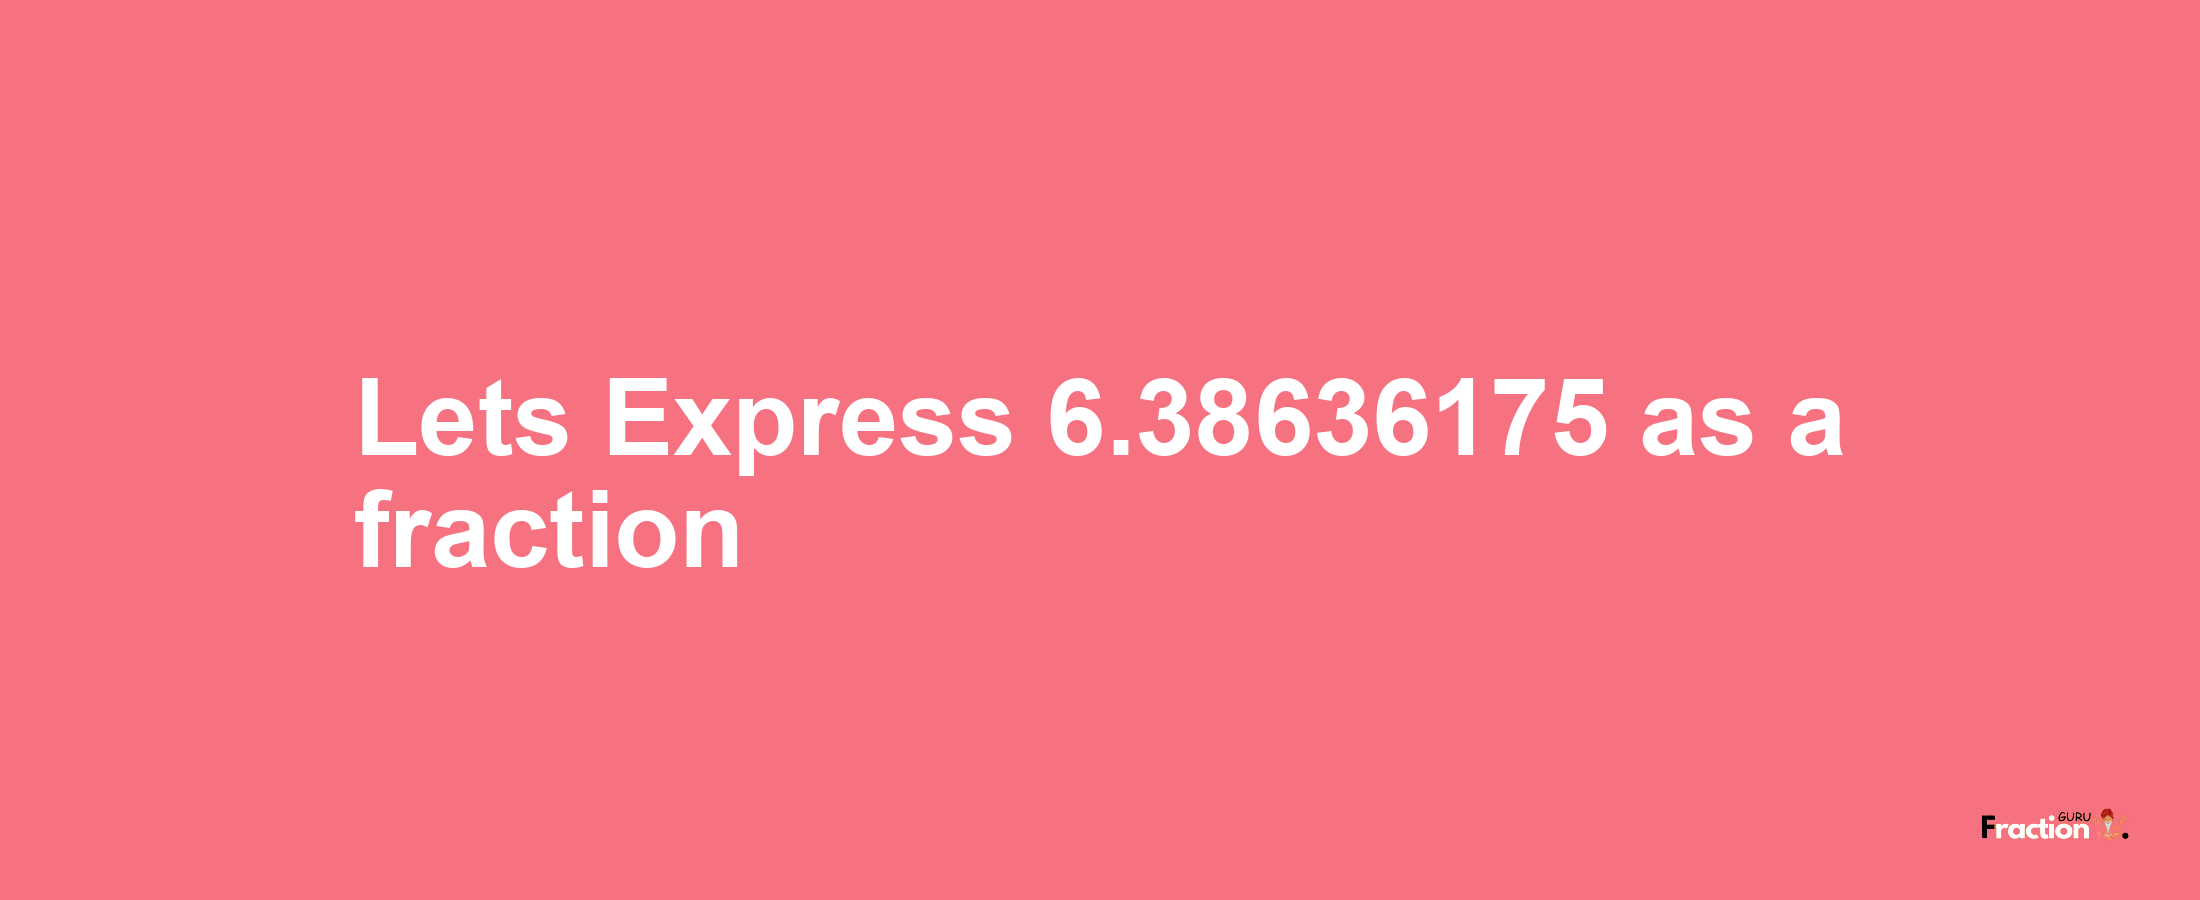 Lets Express 6.38636175 as afraction